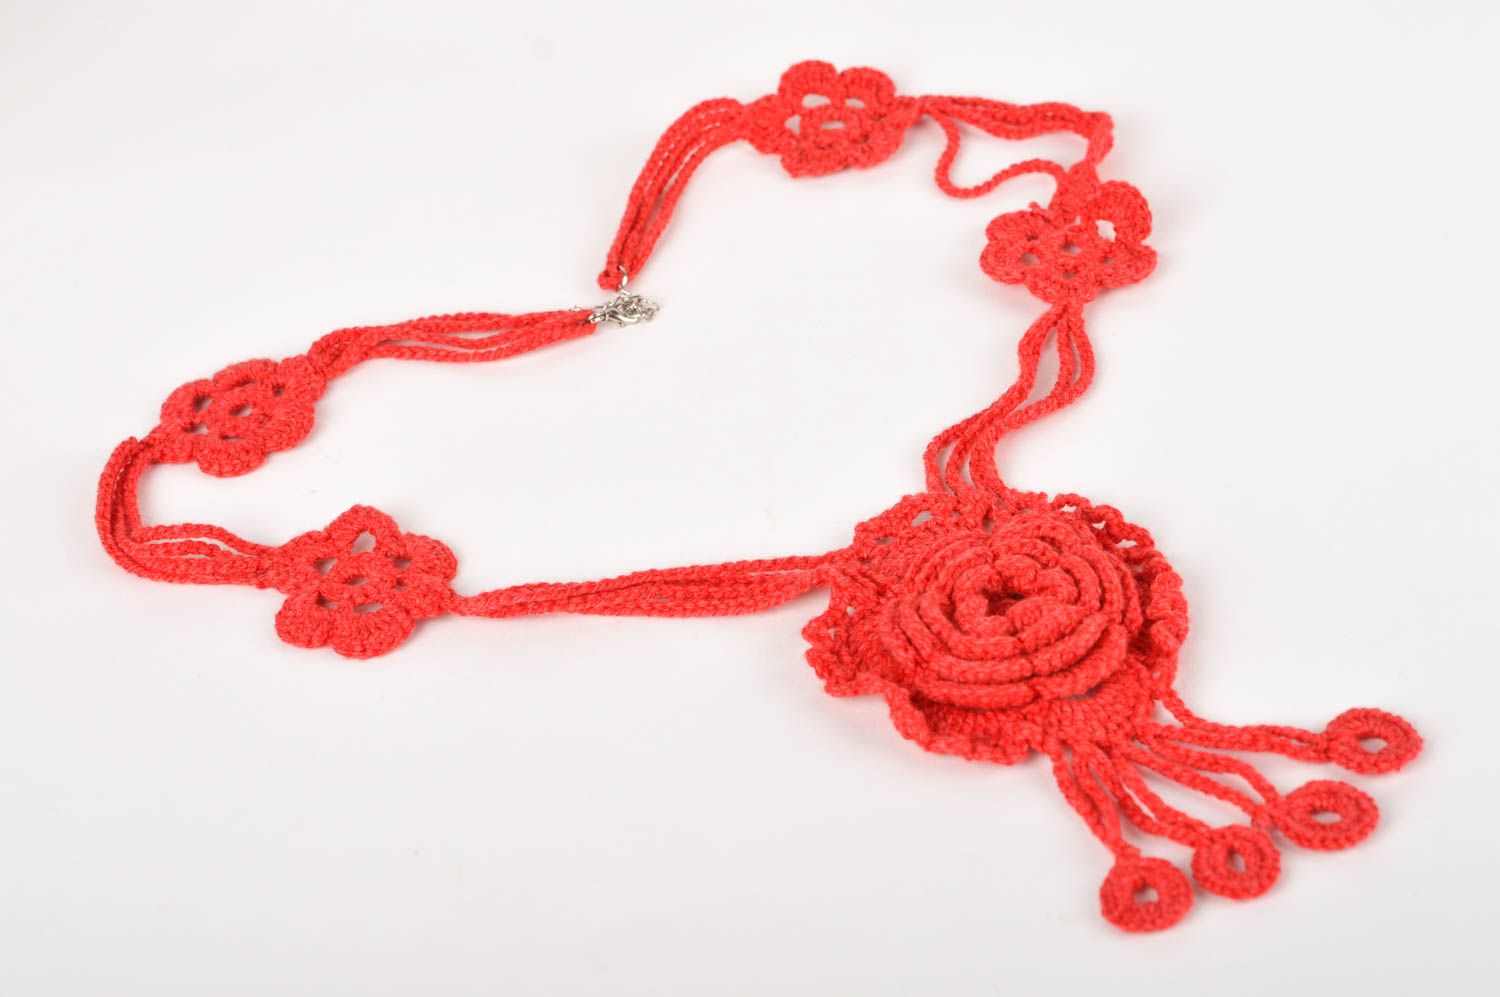 Handmade necklace crochet accessories fashion necklaces for women gifts for her photo 2